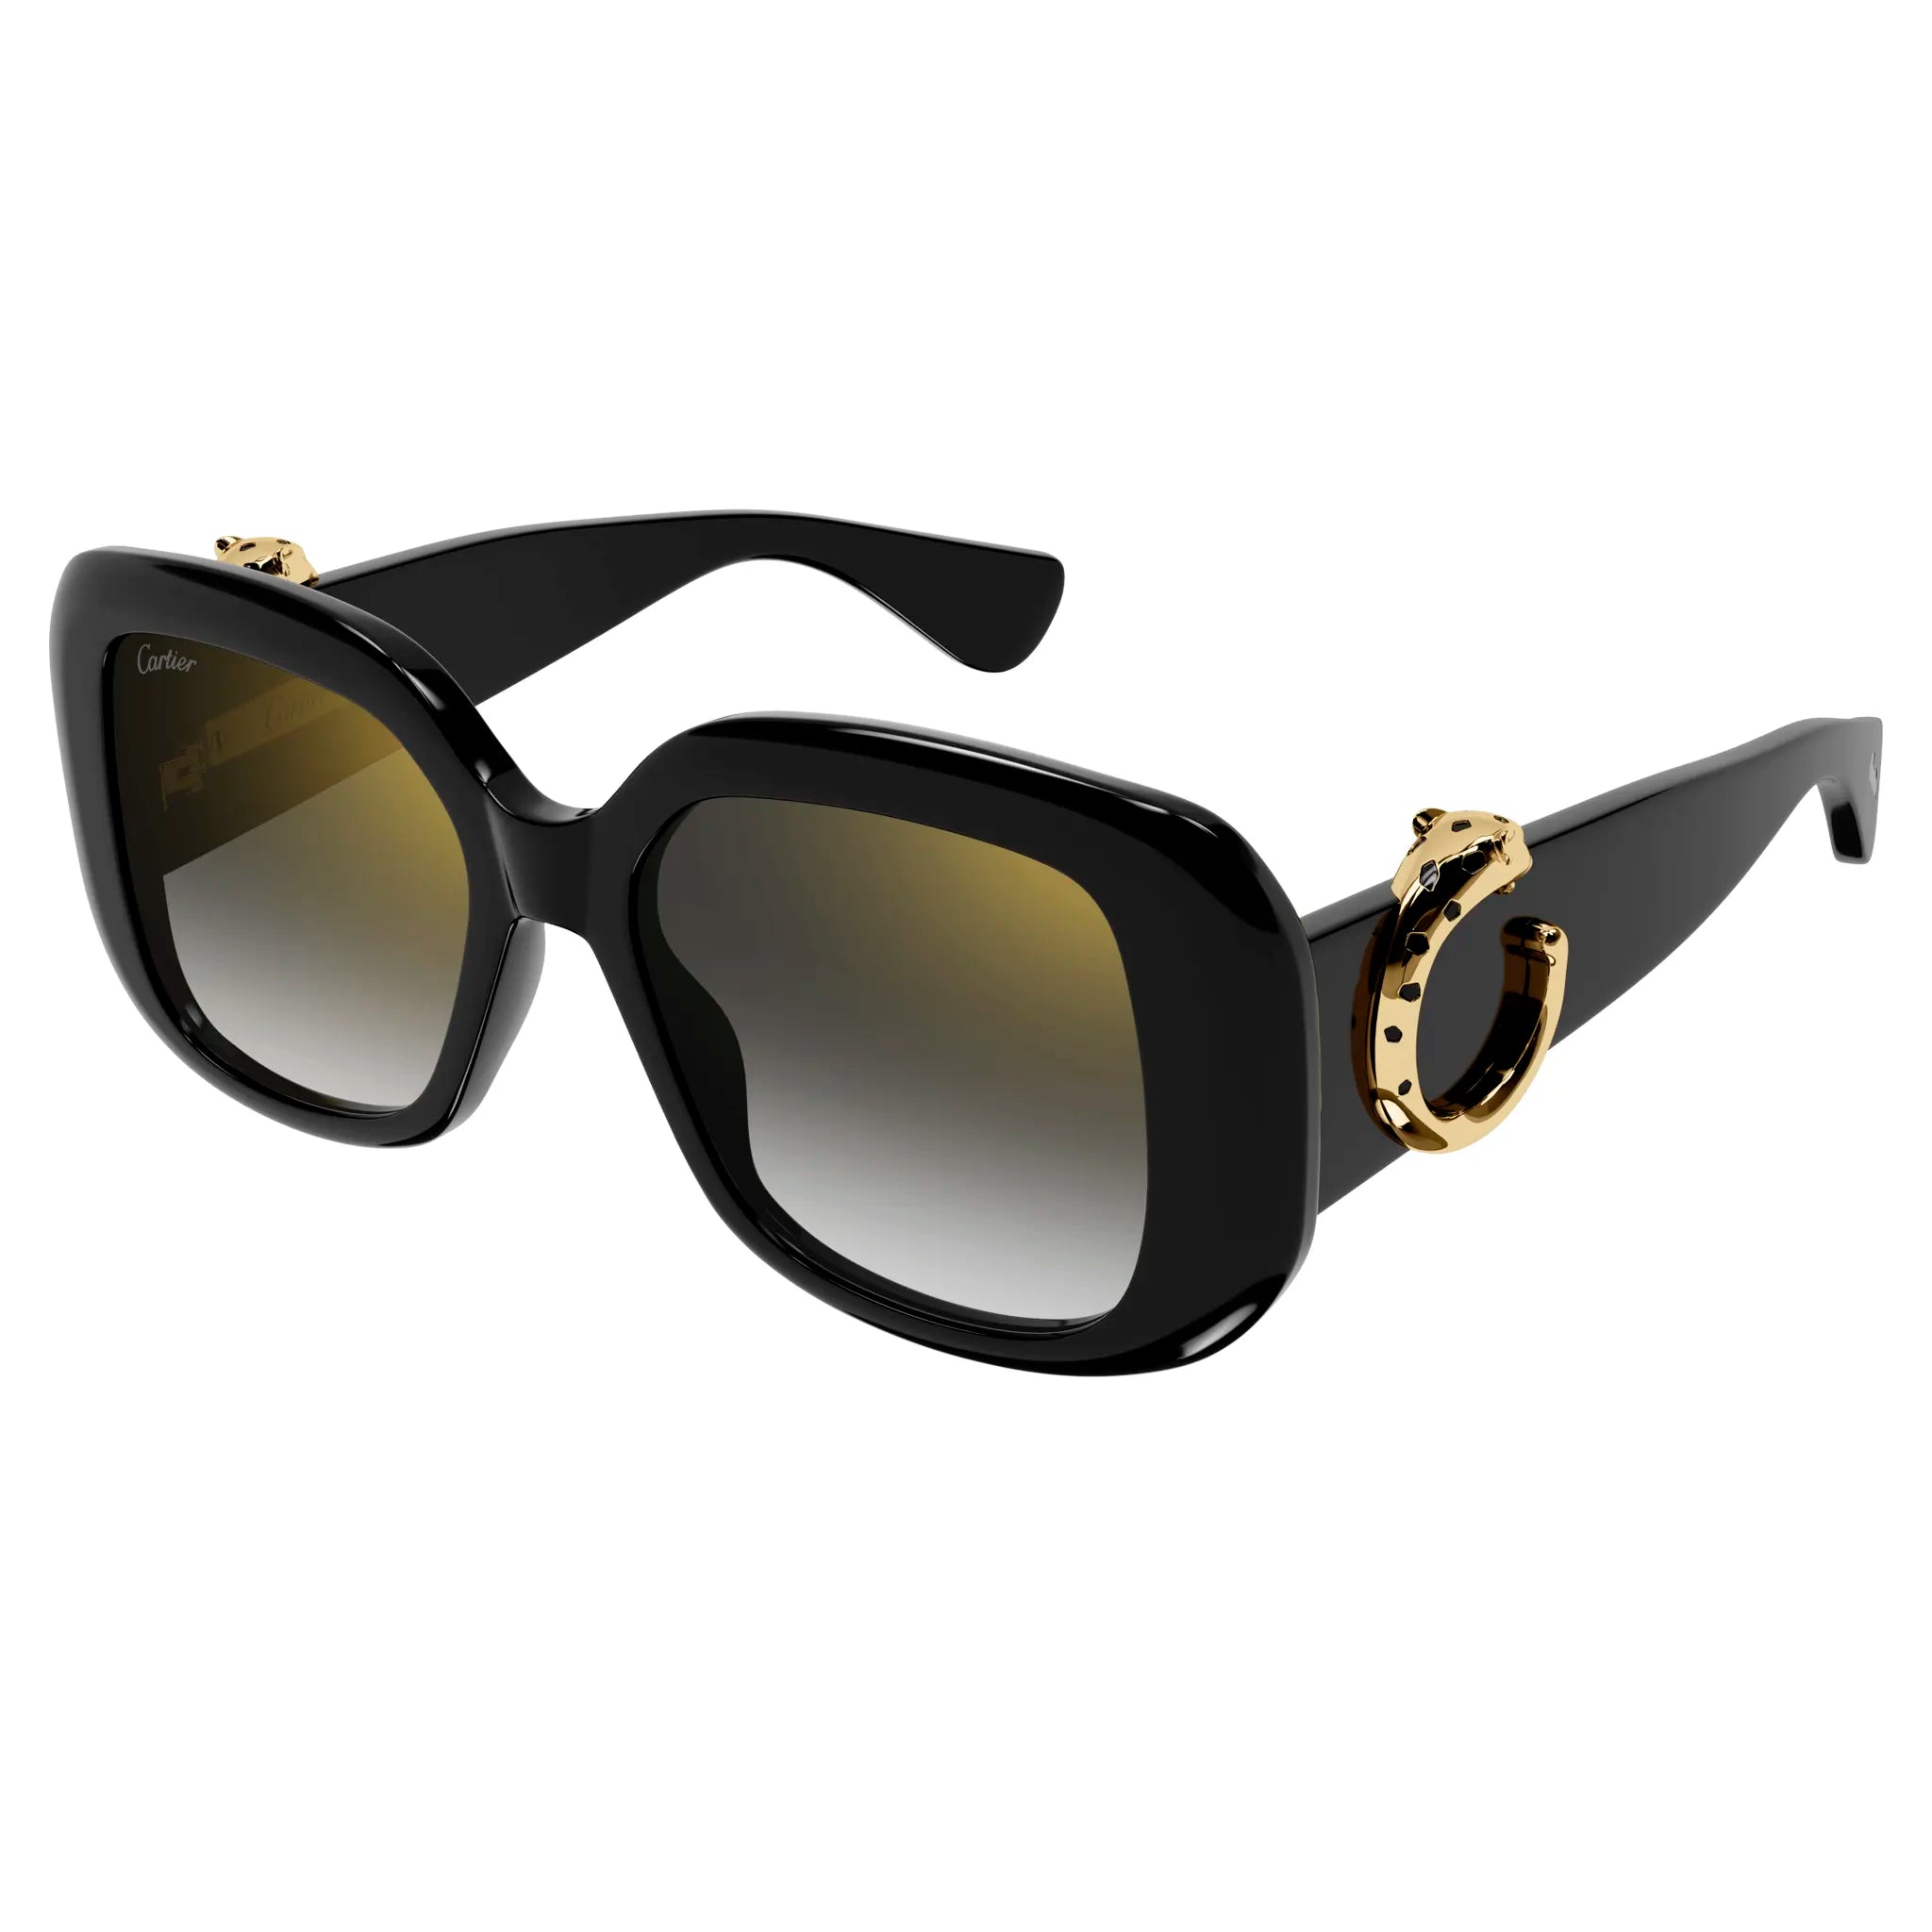 Front Side view of Cartier Eyewear CT0471S-001 Black Grey Sunglasses